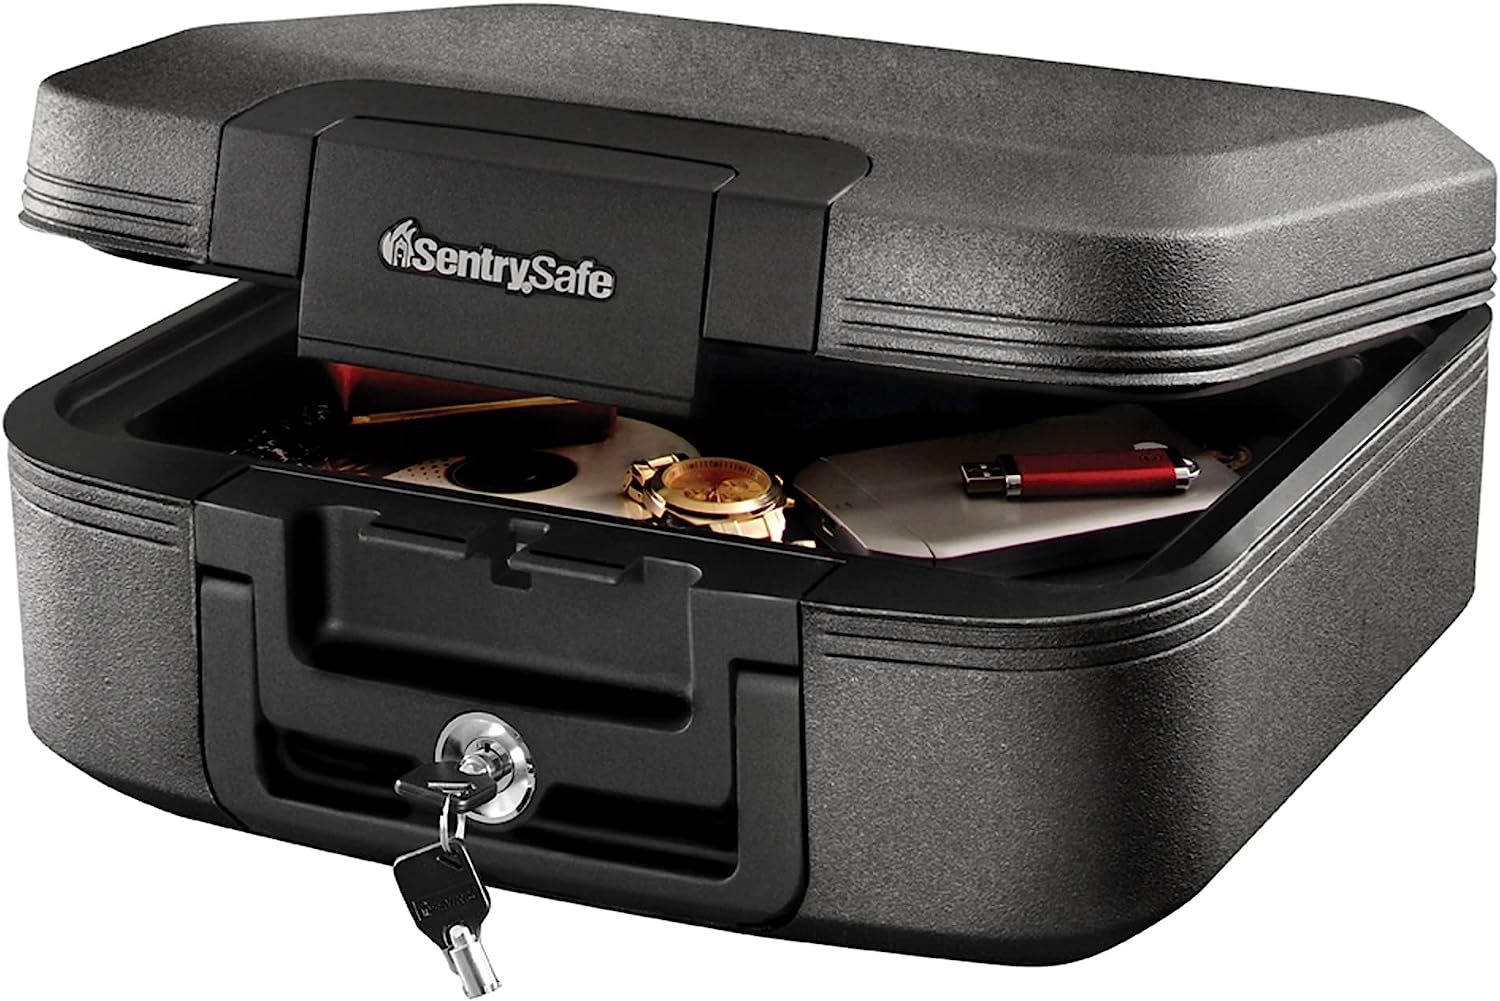 SentrySafe Fireproof and Waterproof Safe Box with Key [...]